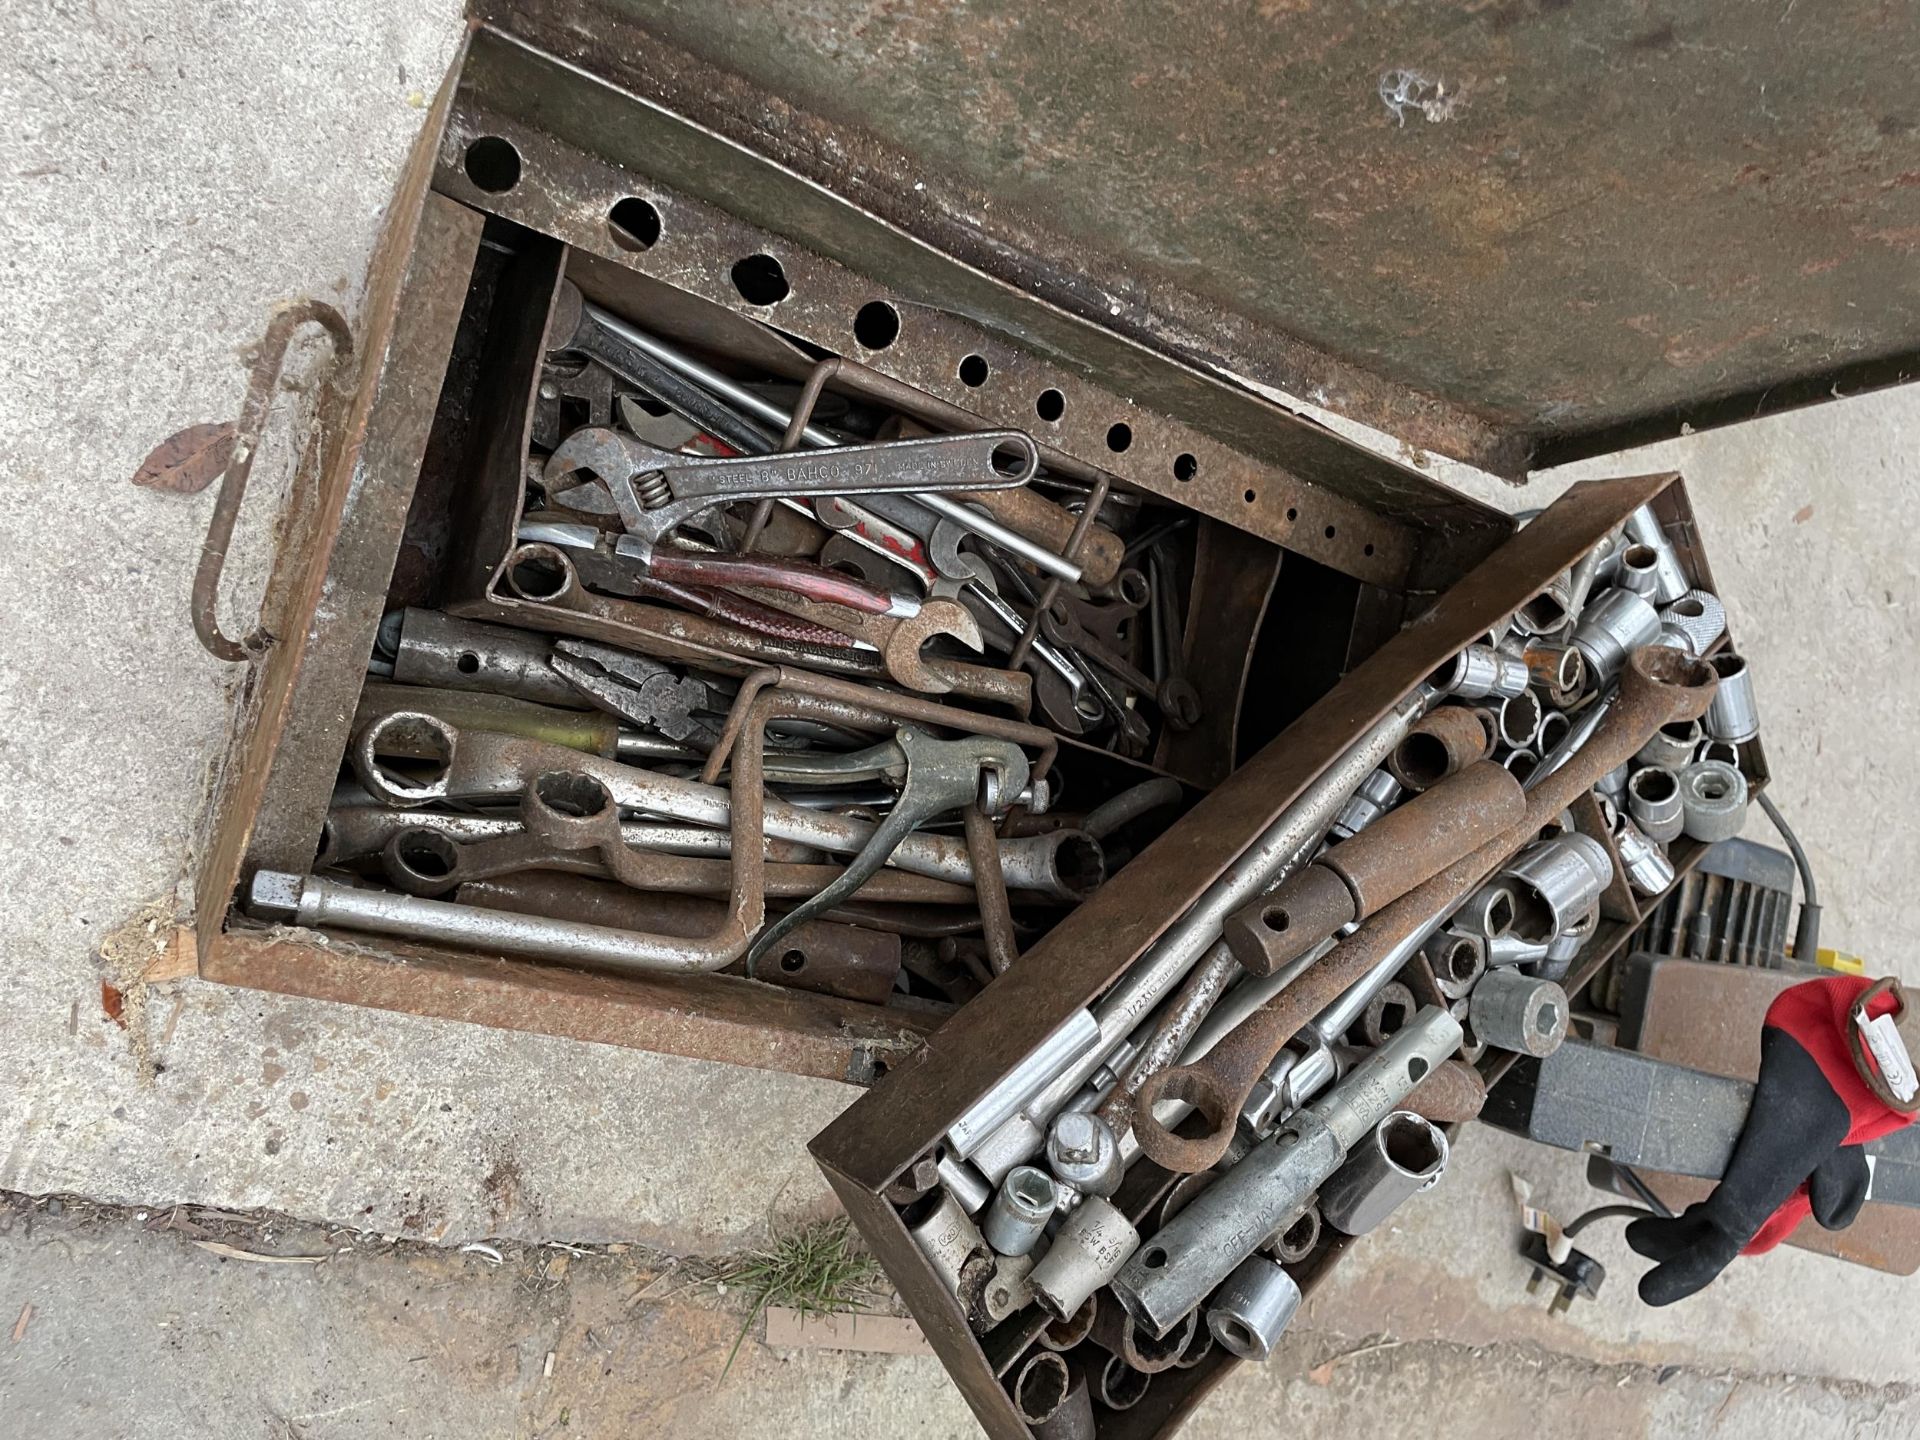 A METAL TOOL CHEST CONTAINING A LARGE ASSORTMENT OF SOCKETS AND SPANNERS ETC - Image 2 of 2